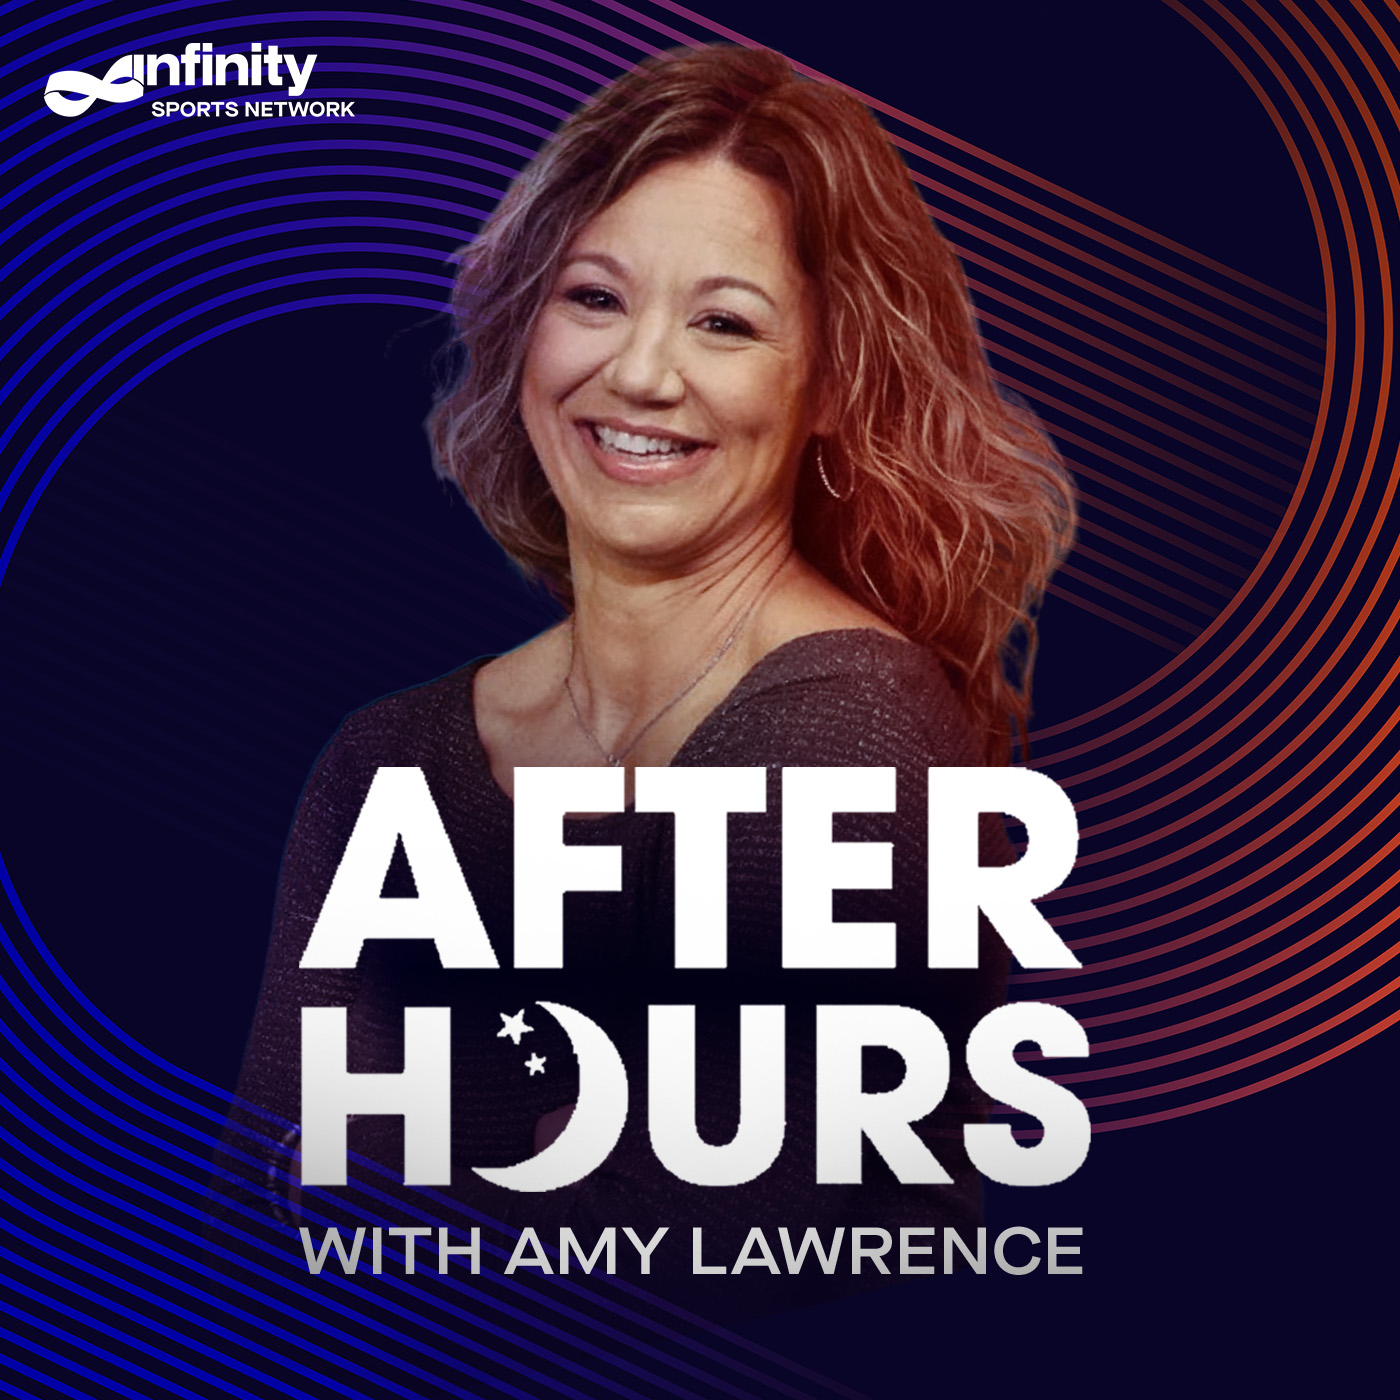 10-26-21 After Hours with Amy Lawrence PODCAST: Hour 2